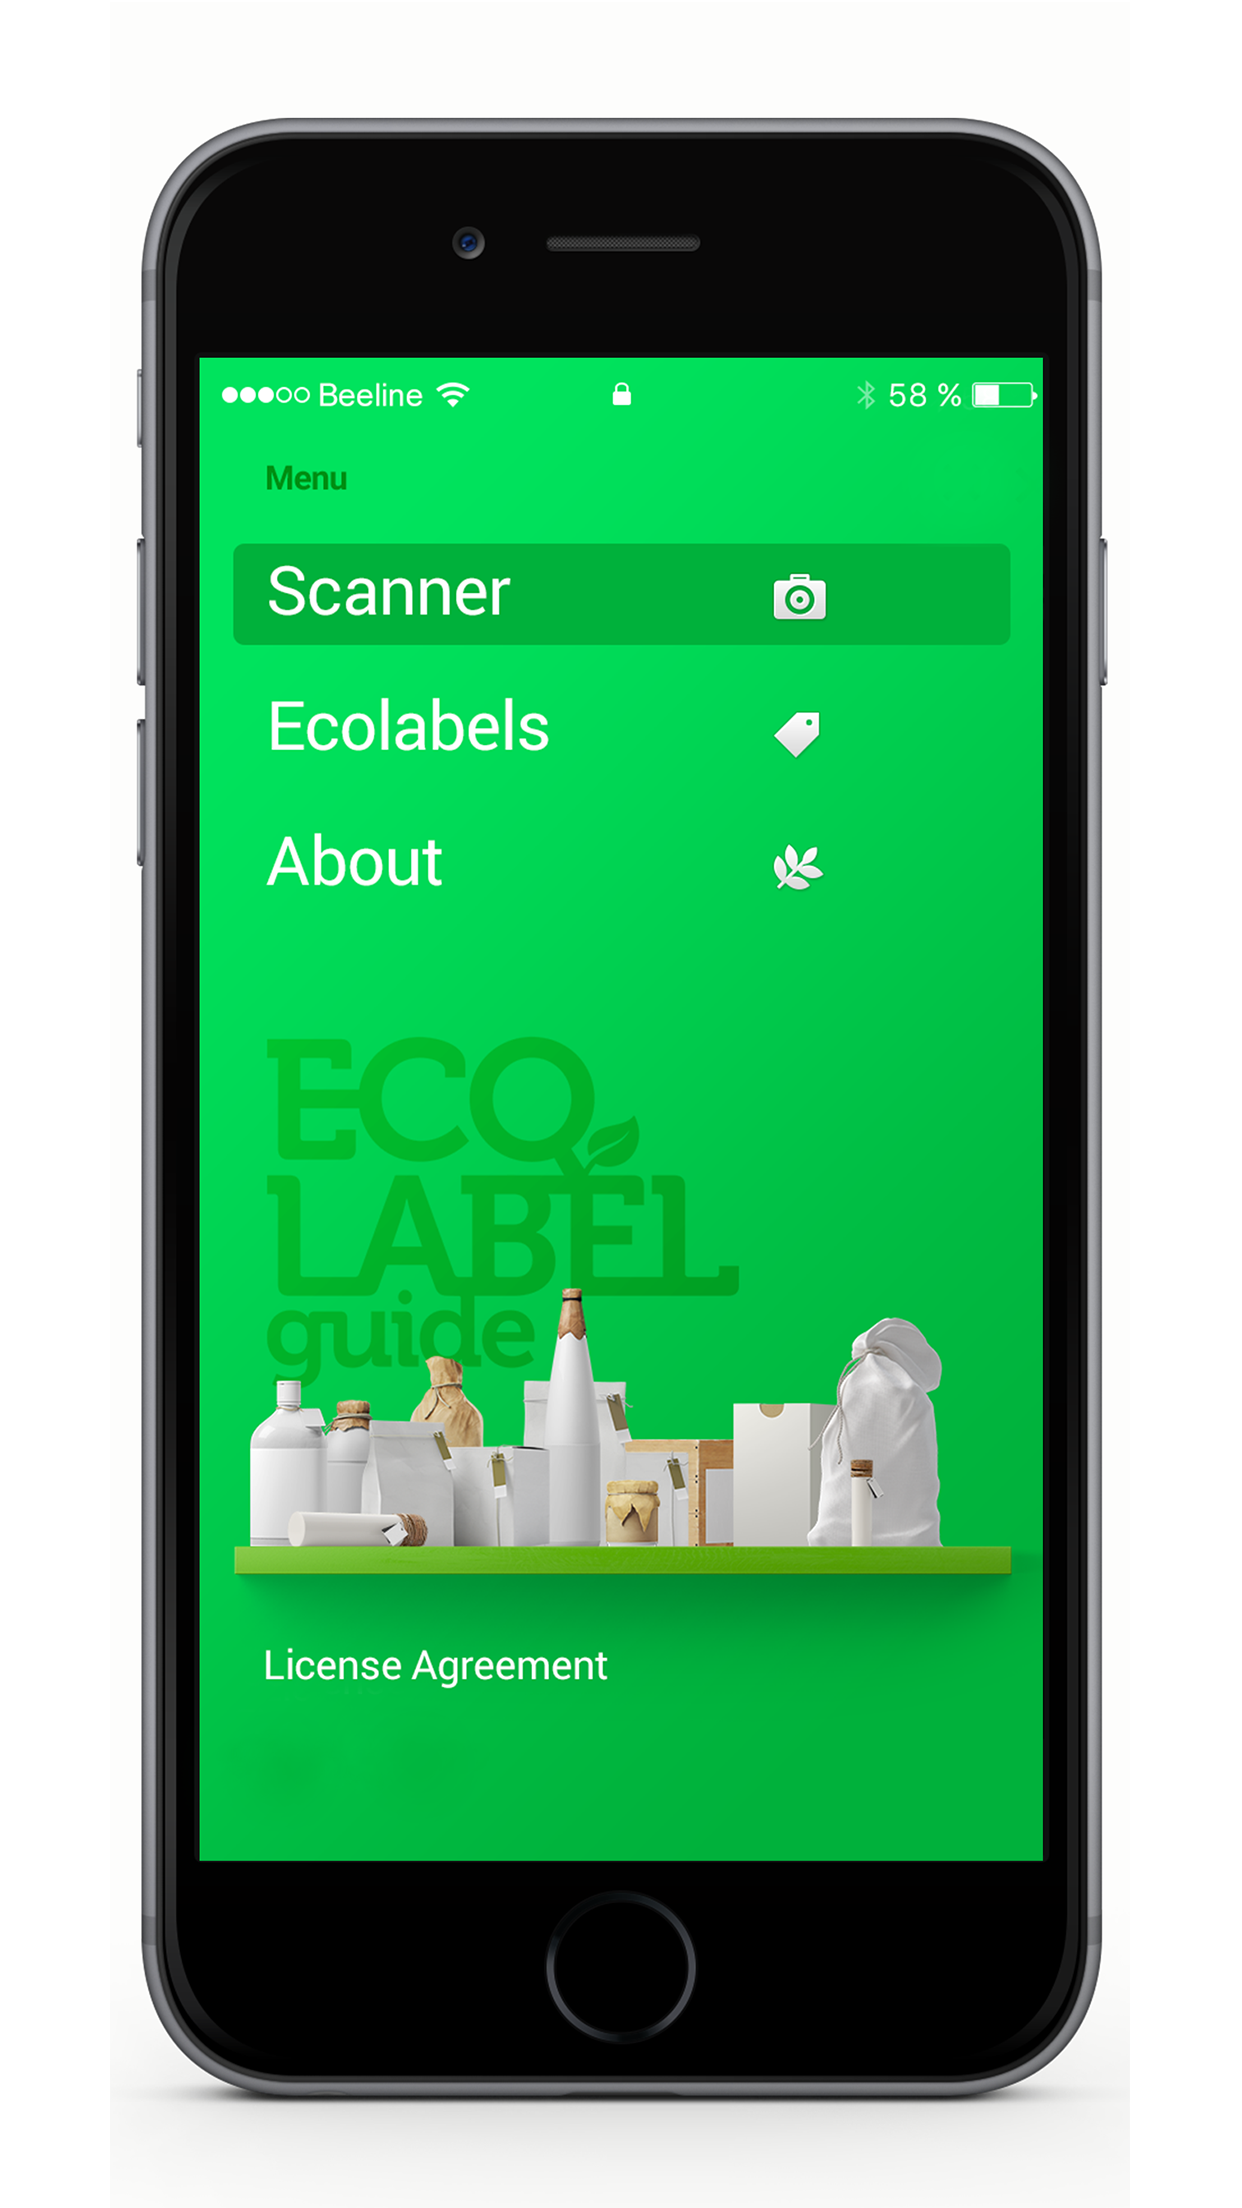 ecoins-eco - Apps on Google Play